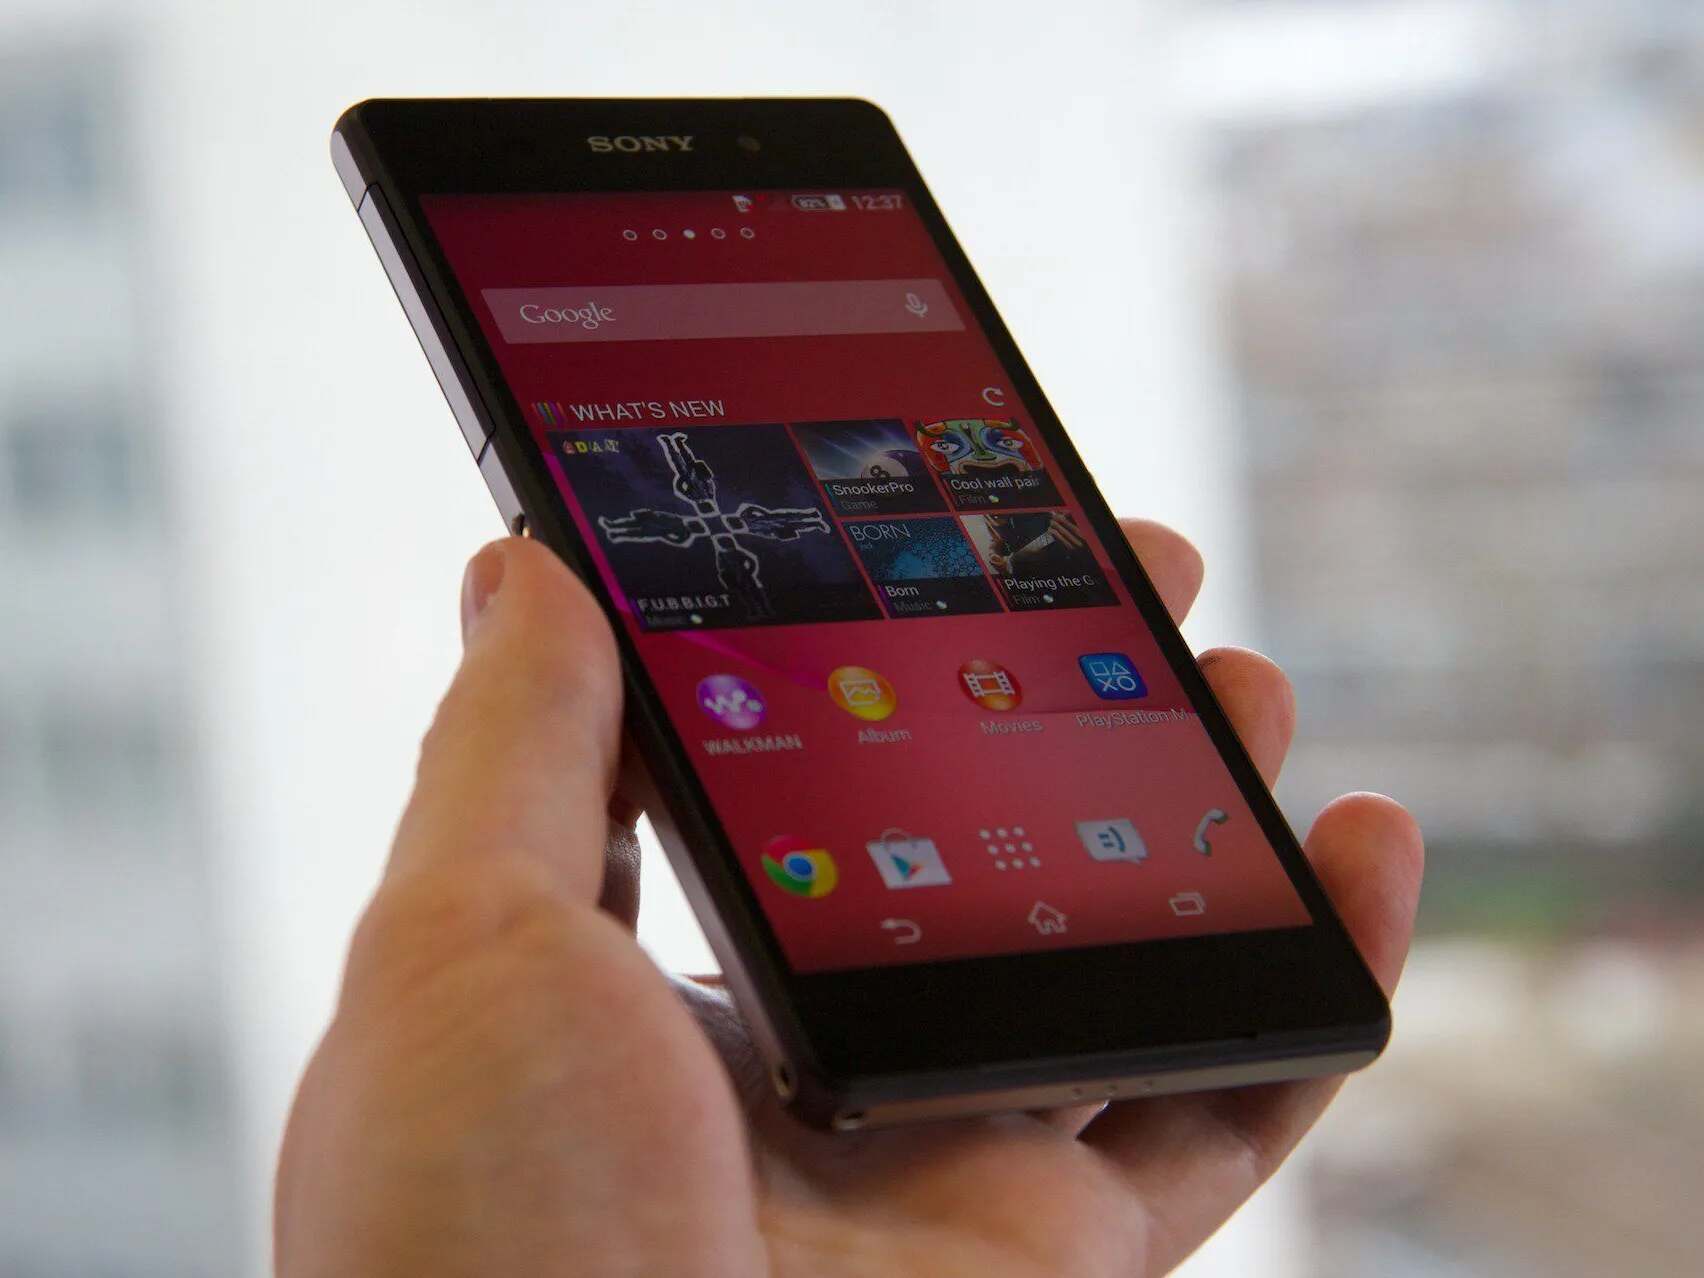 xperia-z2-unboxing-exploring-the-contents-of-the-package